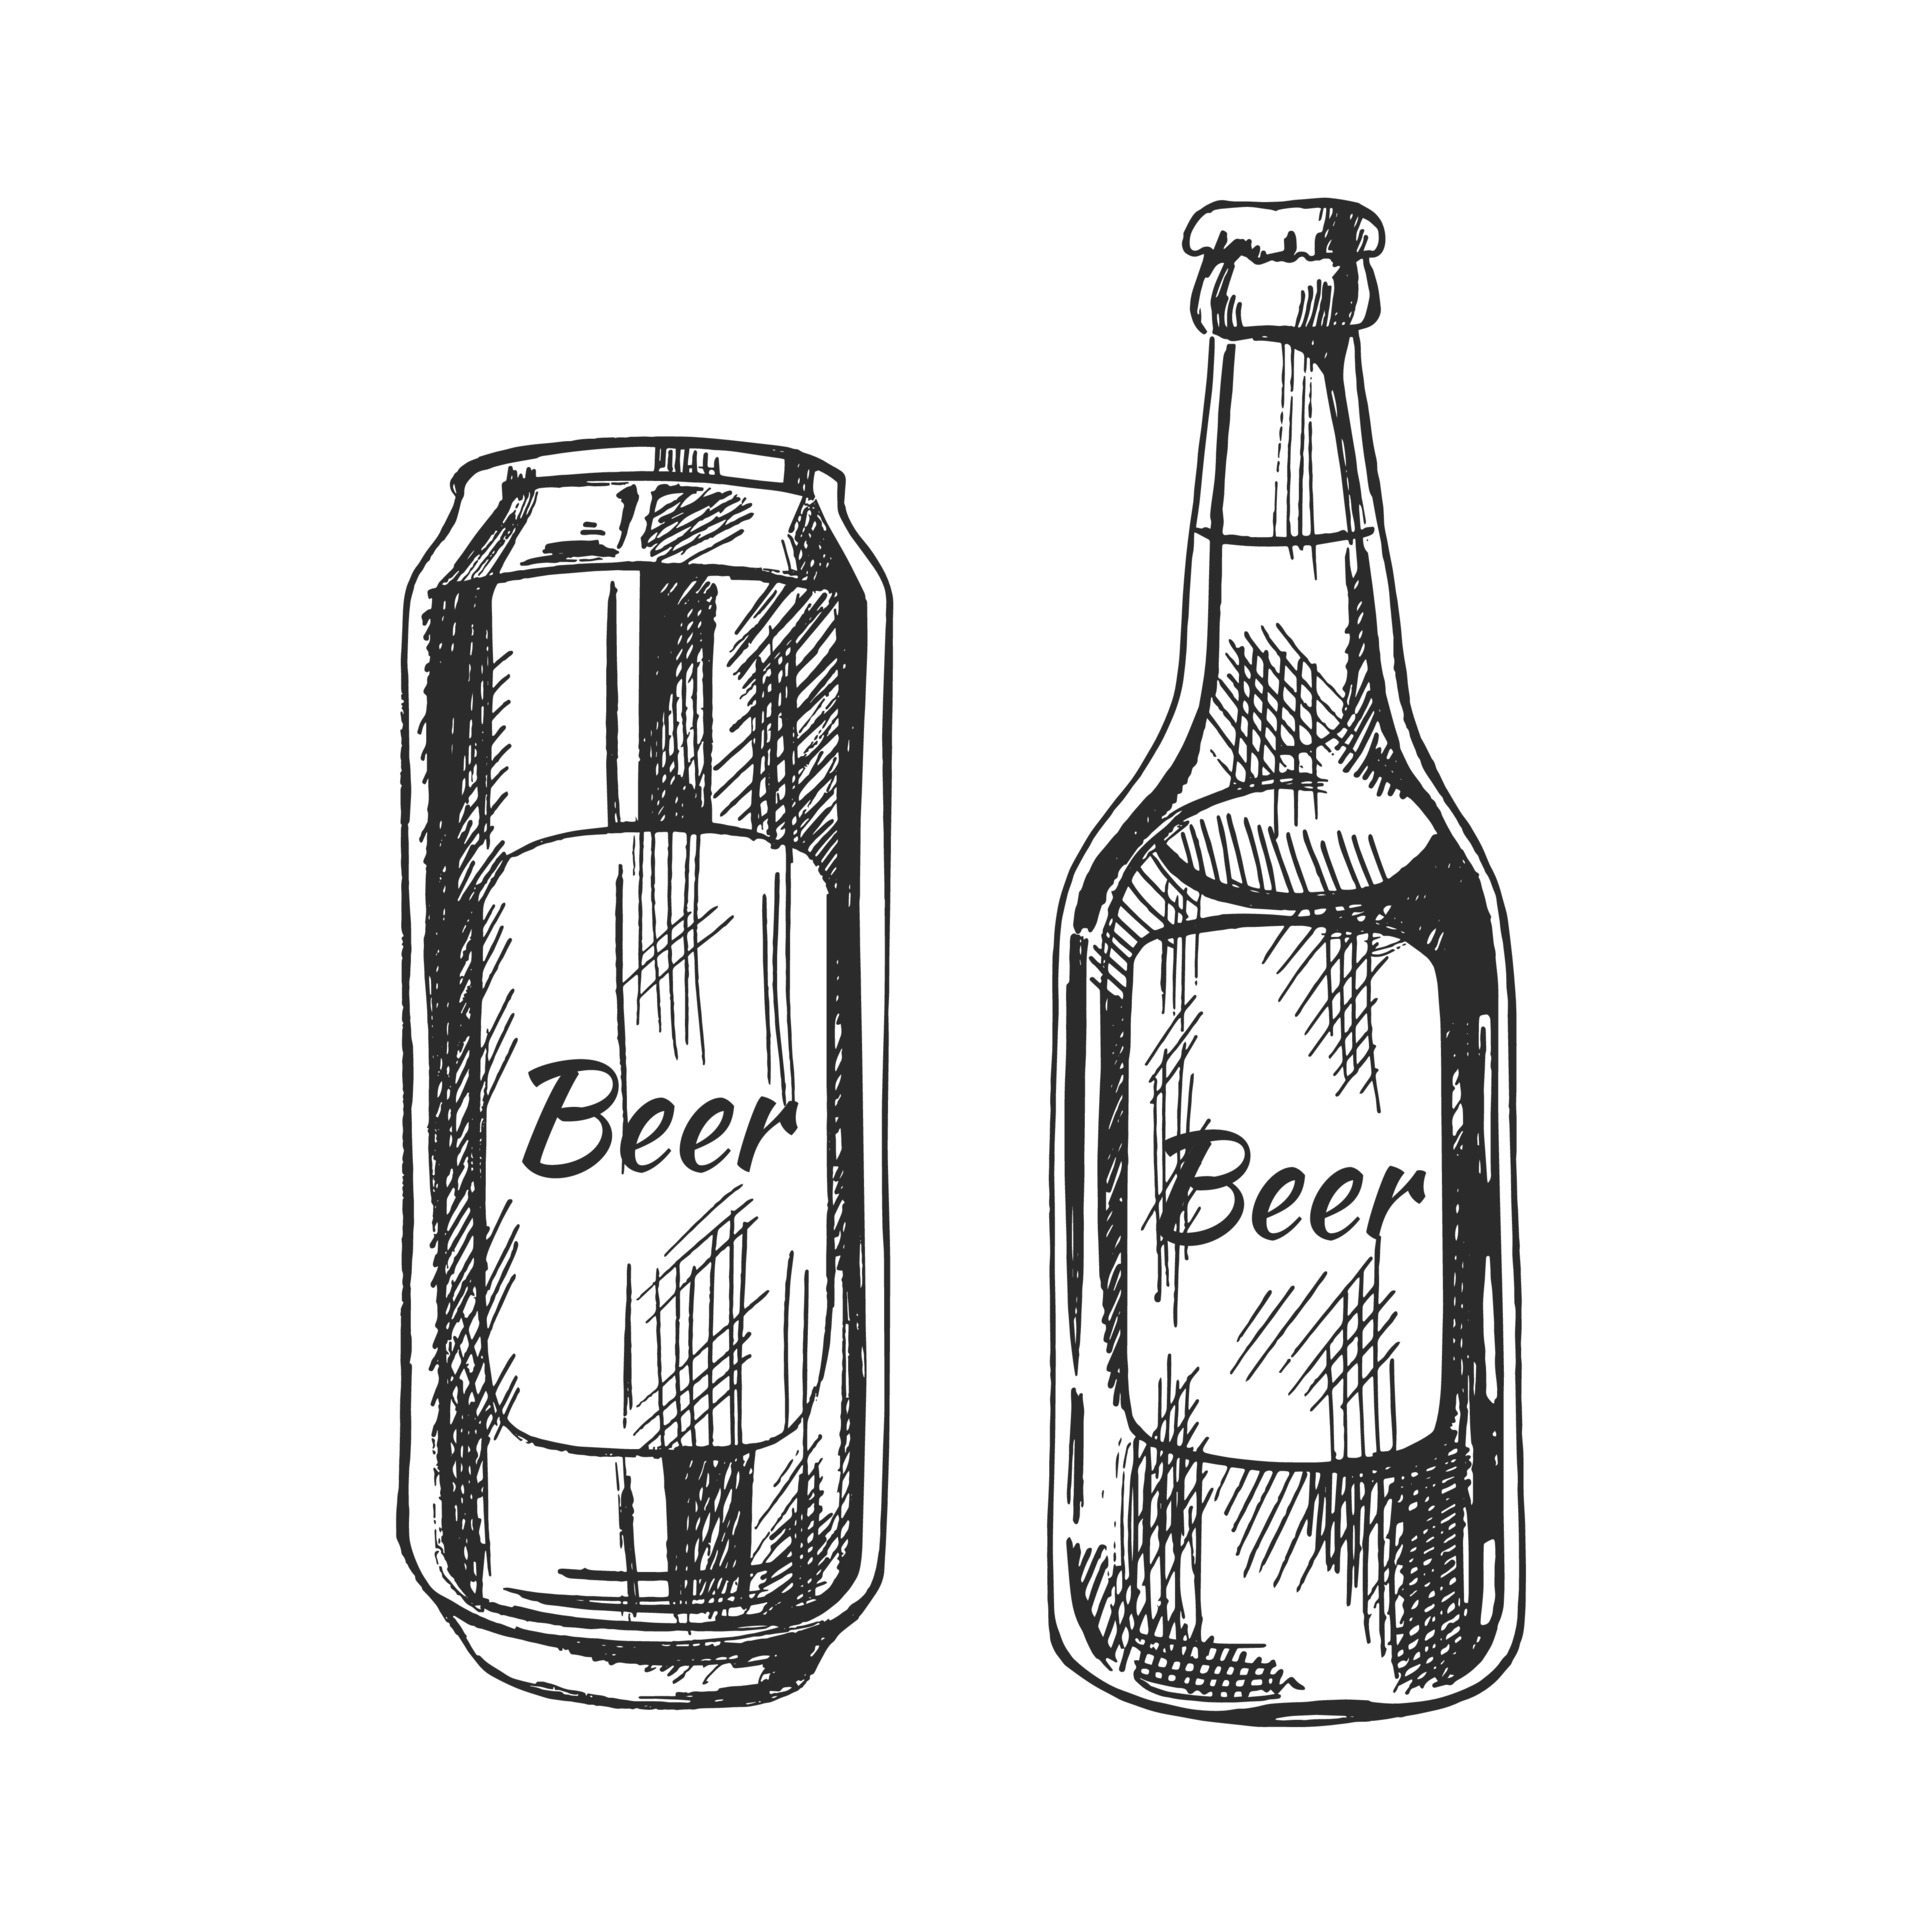 Drawing a plastic bottle for a liquid with a lid Pencil drawing Isolated  on white background Stock P  Bottle drawing Still life pencil shading  Basic sketching